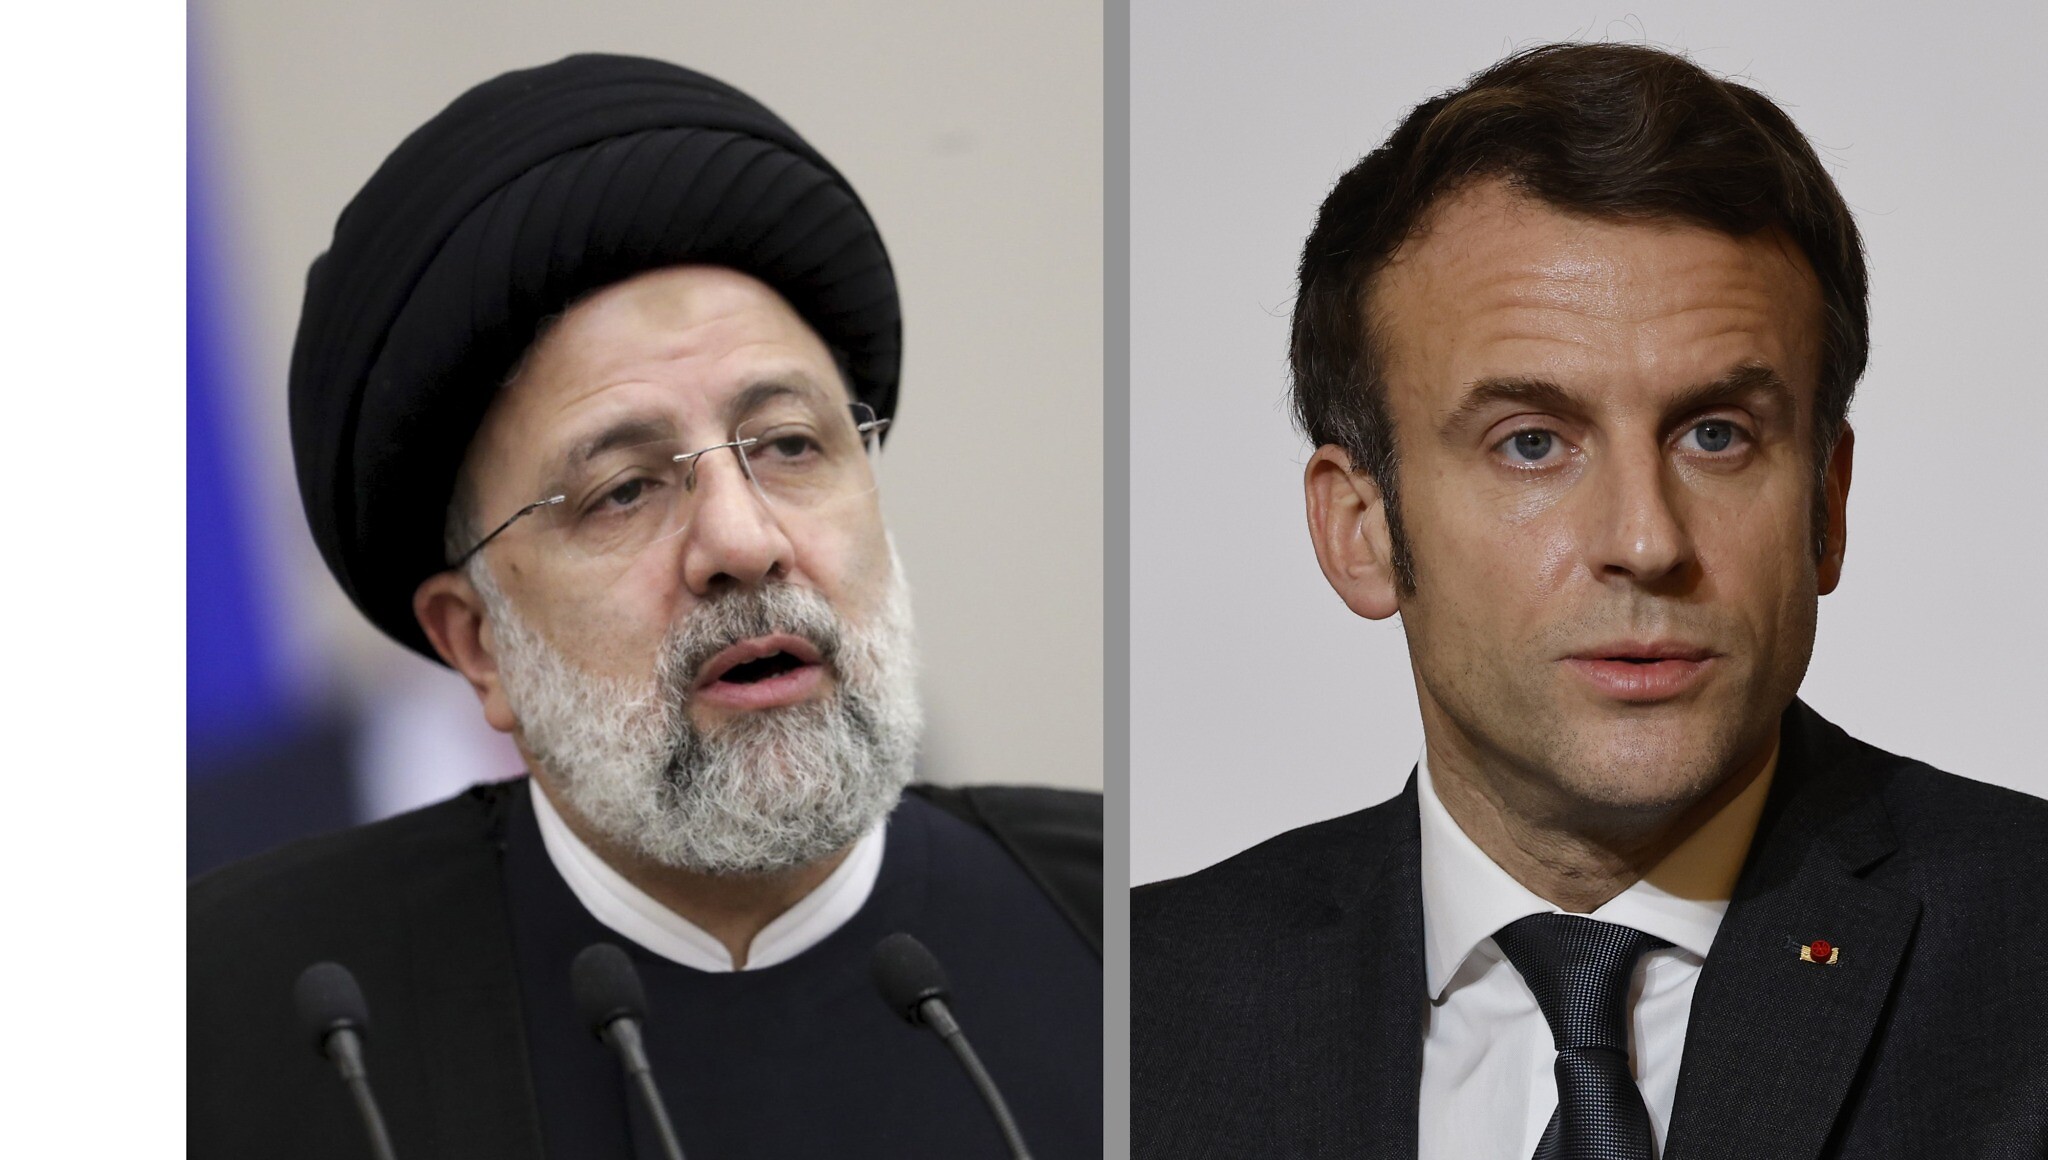  France summons Iran’s diplomat over dual national’s execution